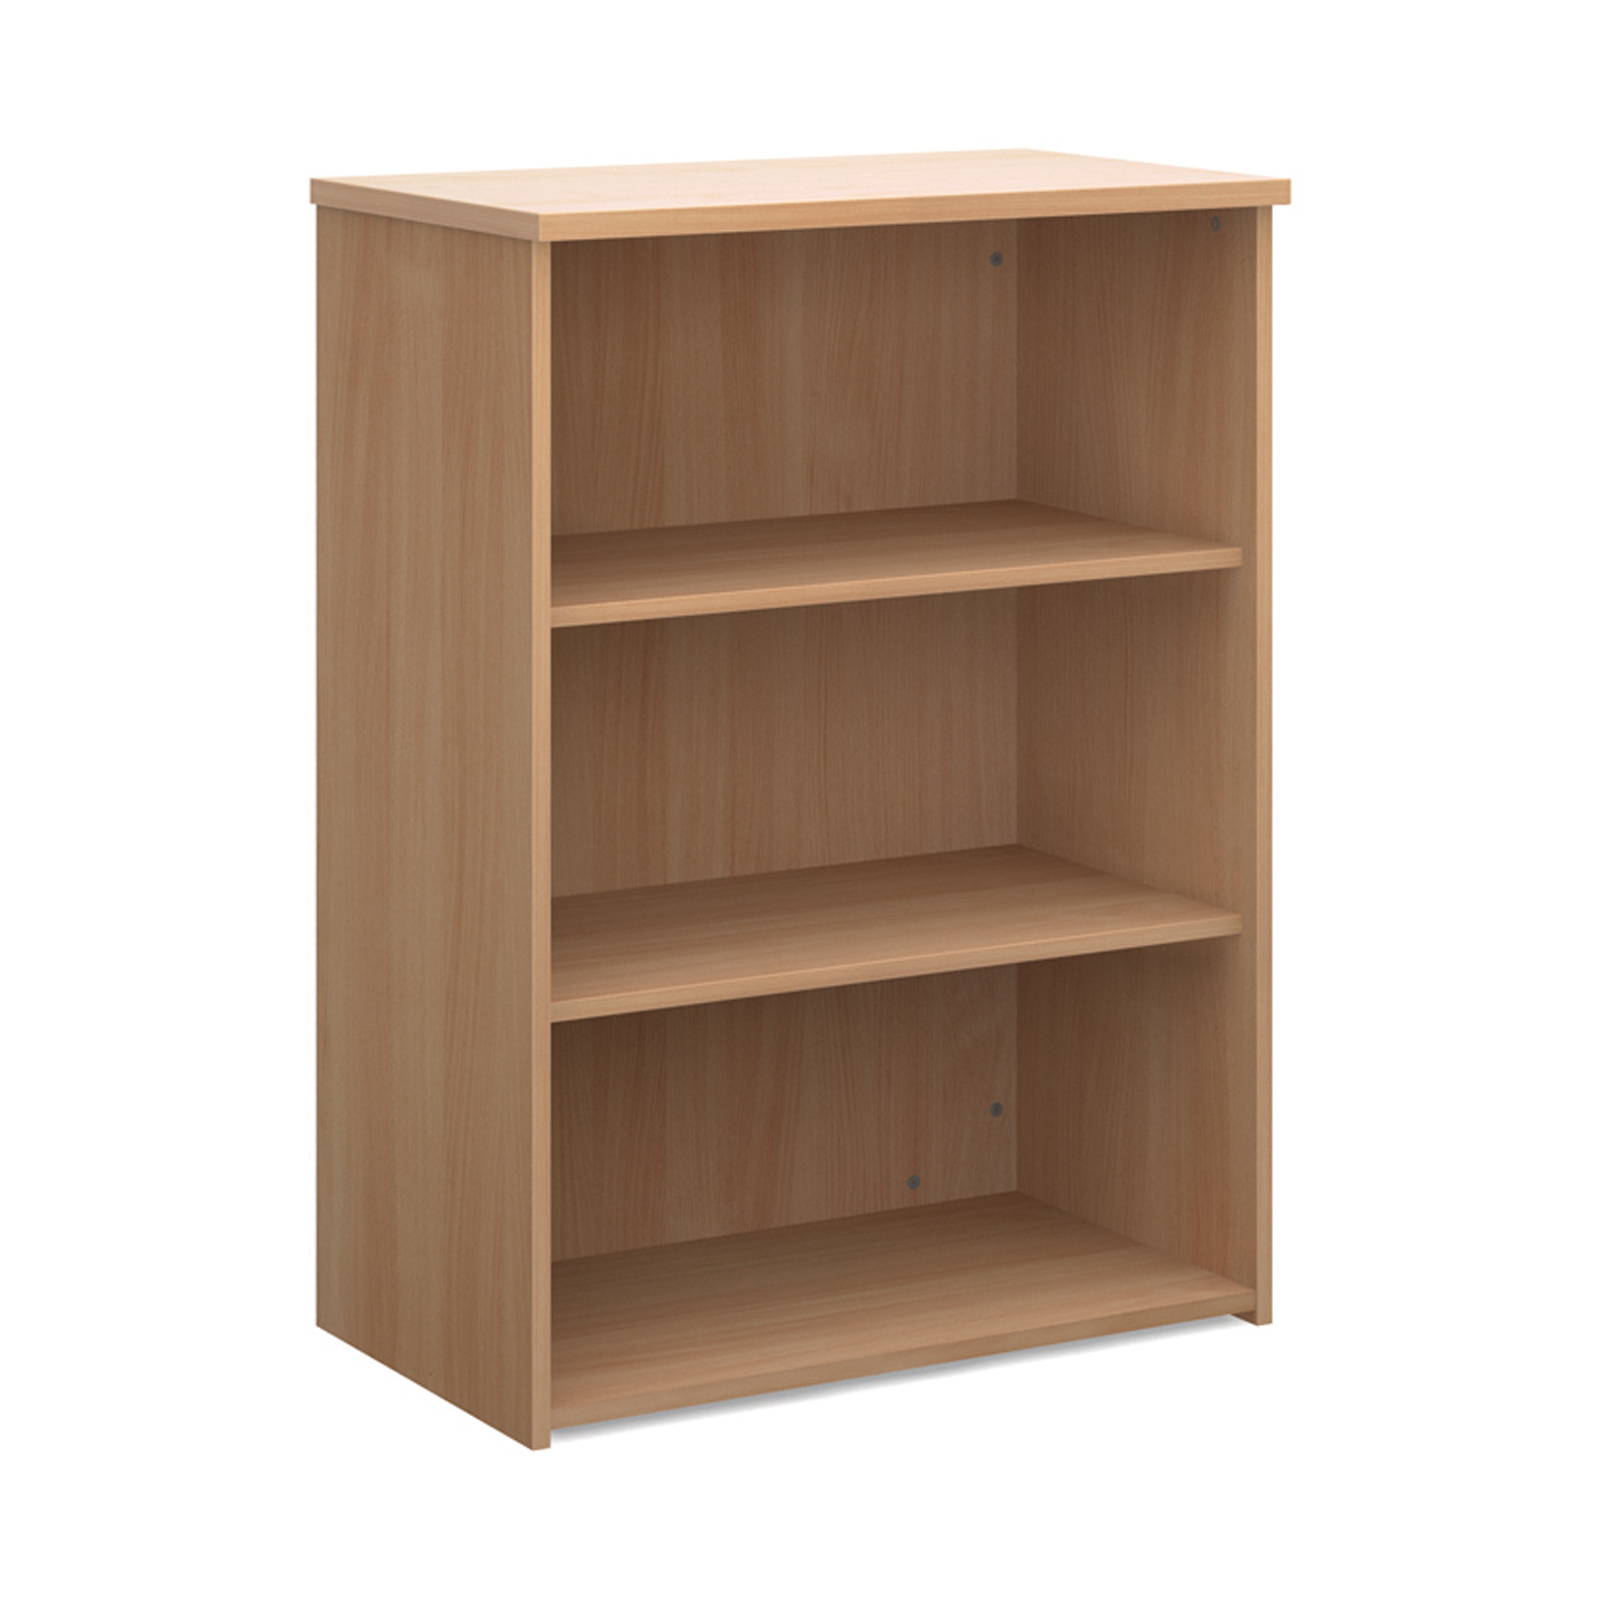 Up To 1200mm High Universal bookcase 1090mm high with 2 shelves - beech